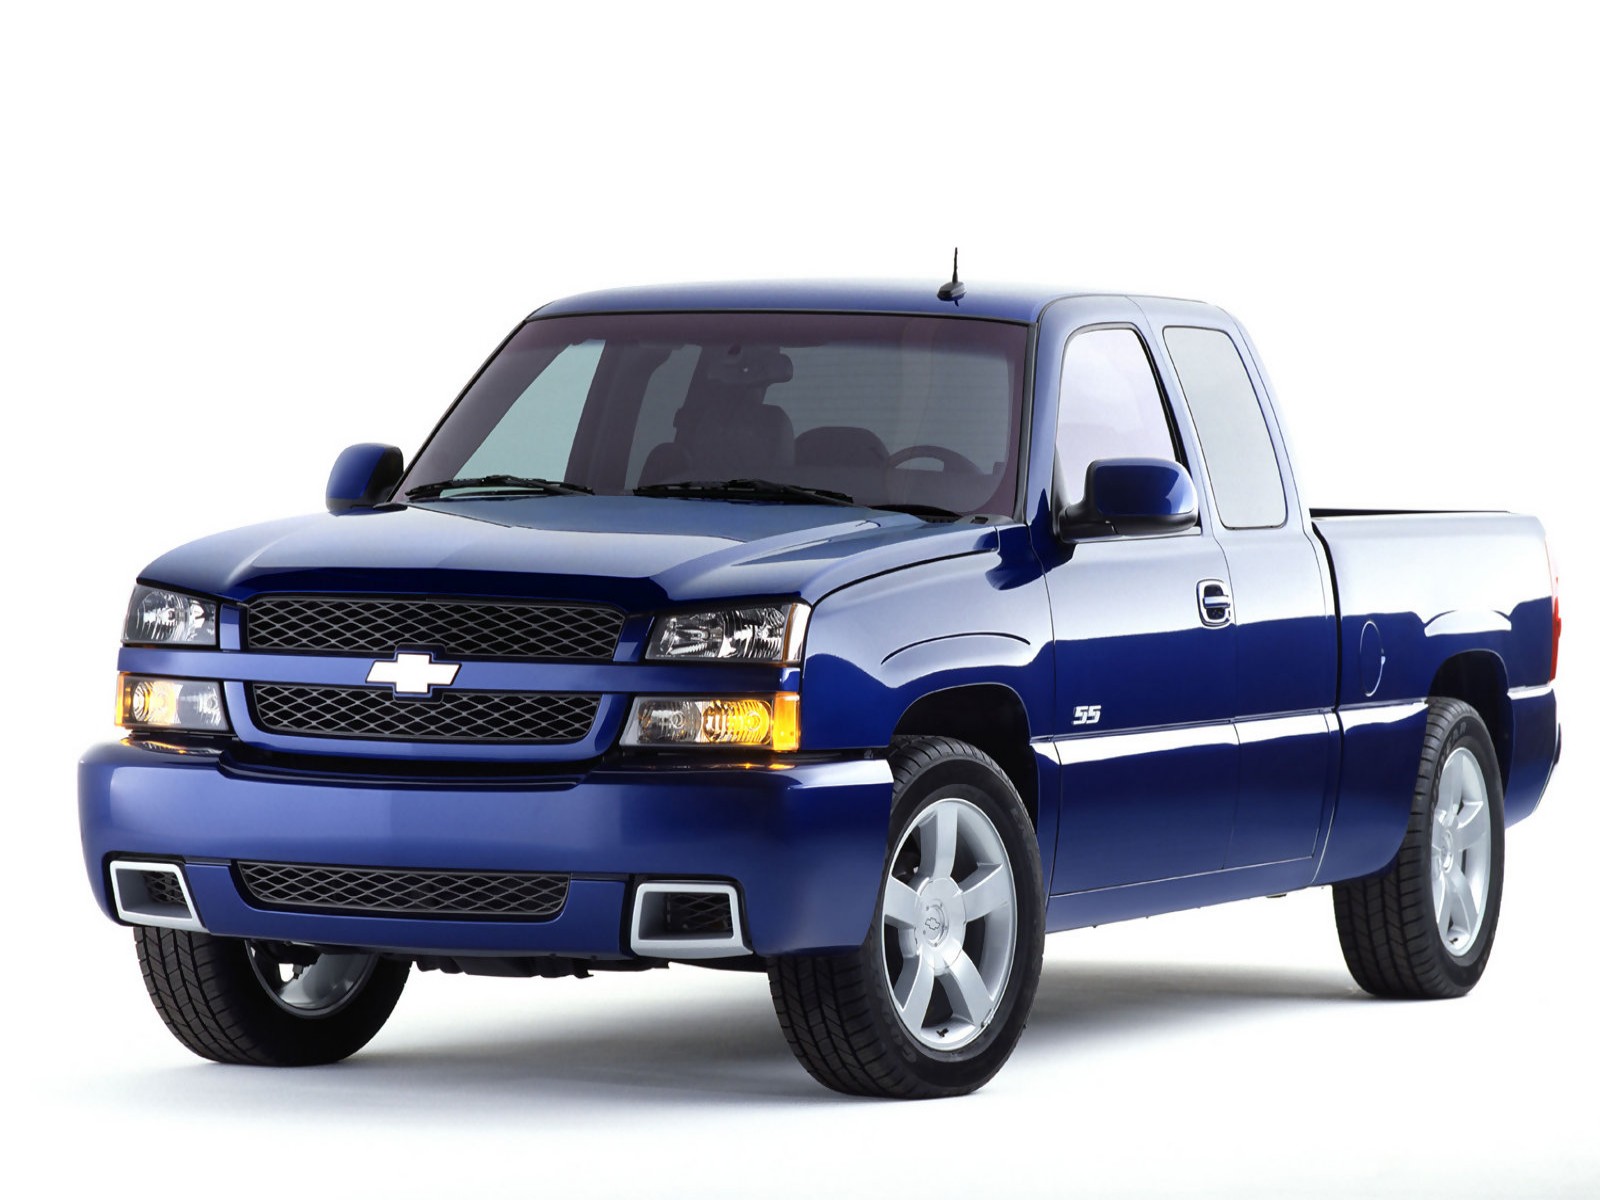 New 2016 Silverado Release and Price on prices-cars.com